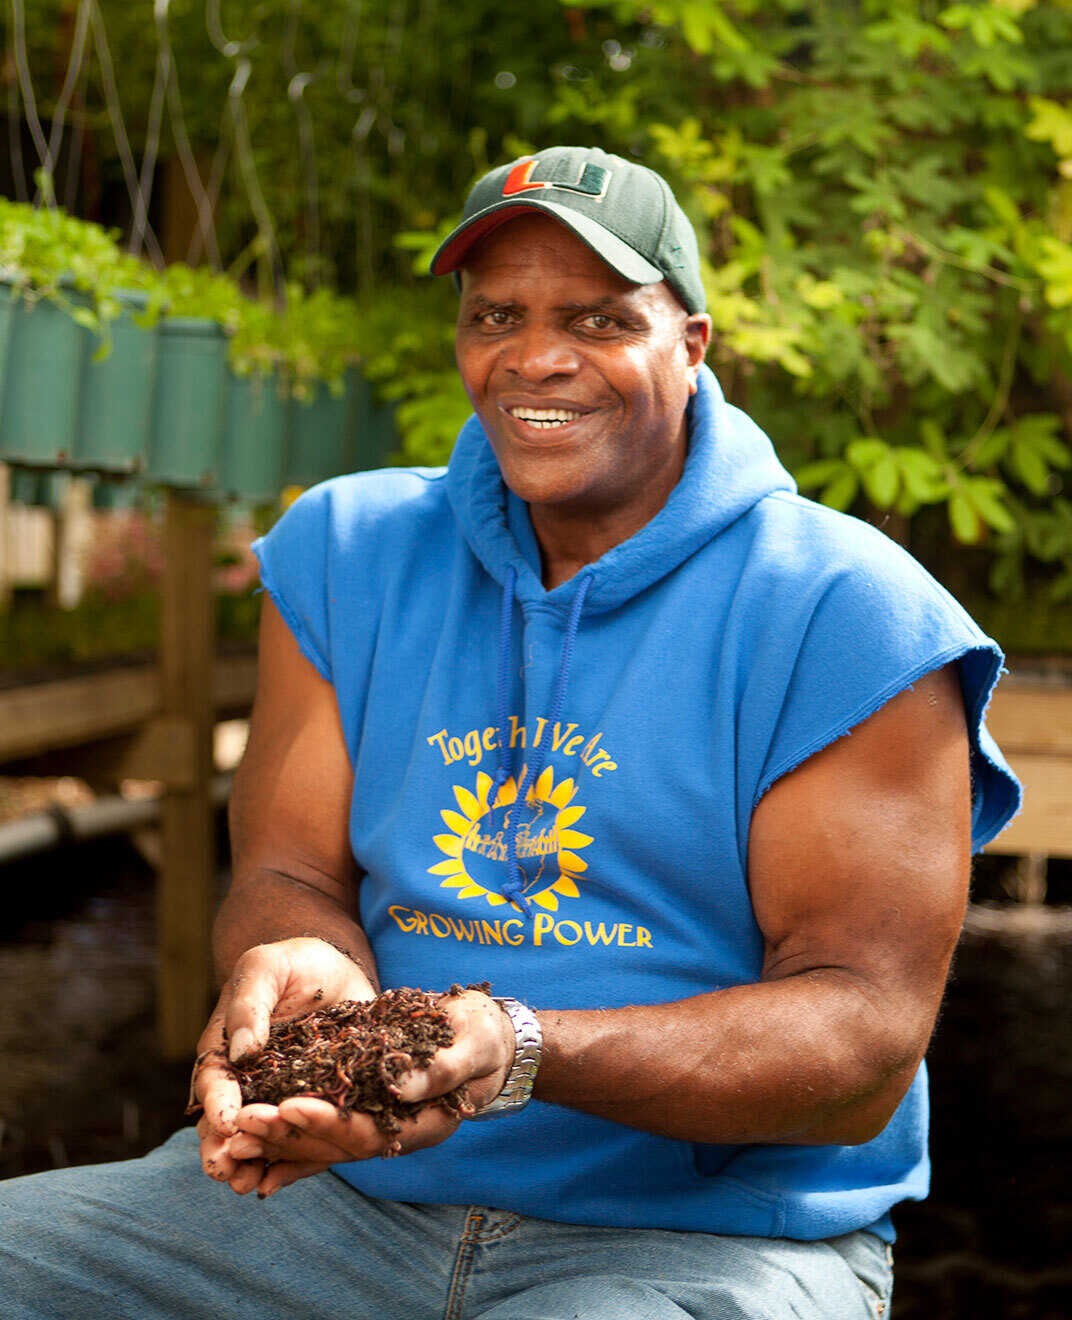 Photo of Will Allen wearing a blue sweatshirt with the sleeves cut off that reads "Together we are growing power" and features a graphic of a sunflower. He is holding a handful of soil with a garden in the background.